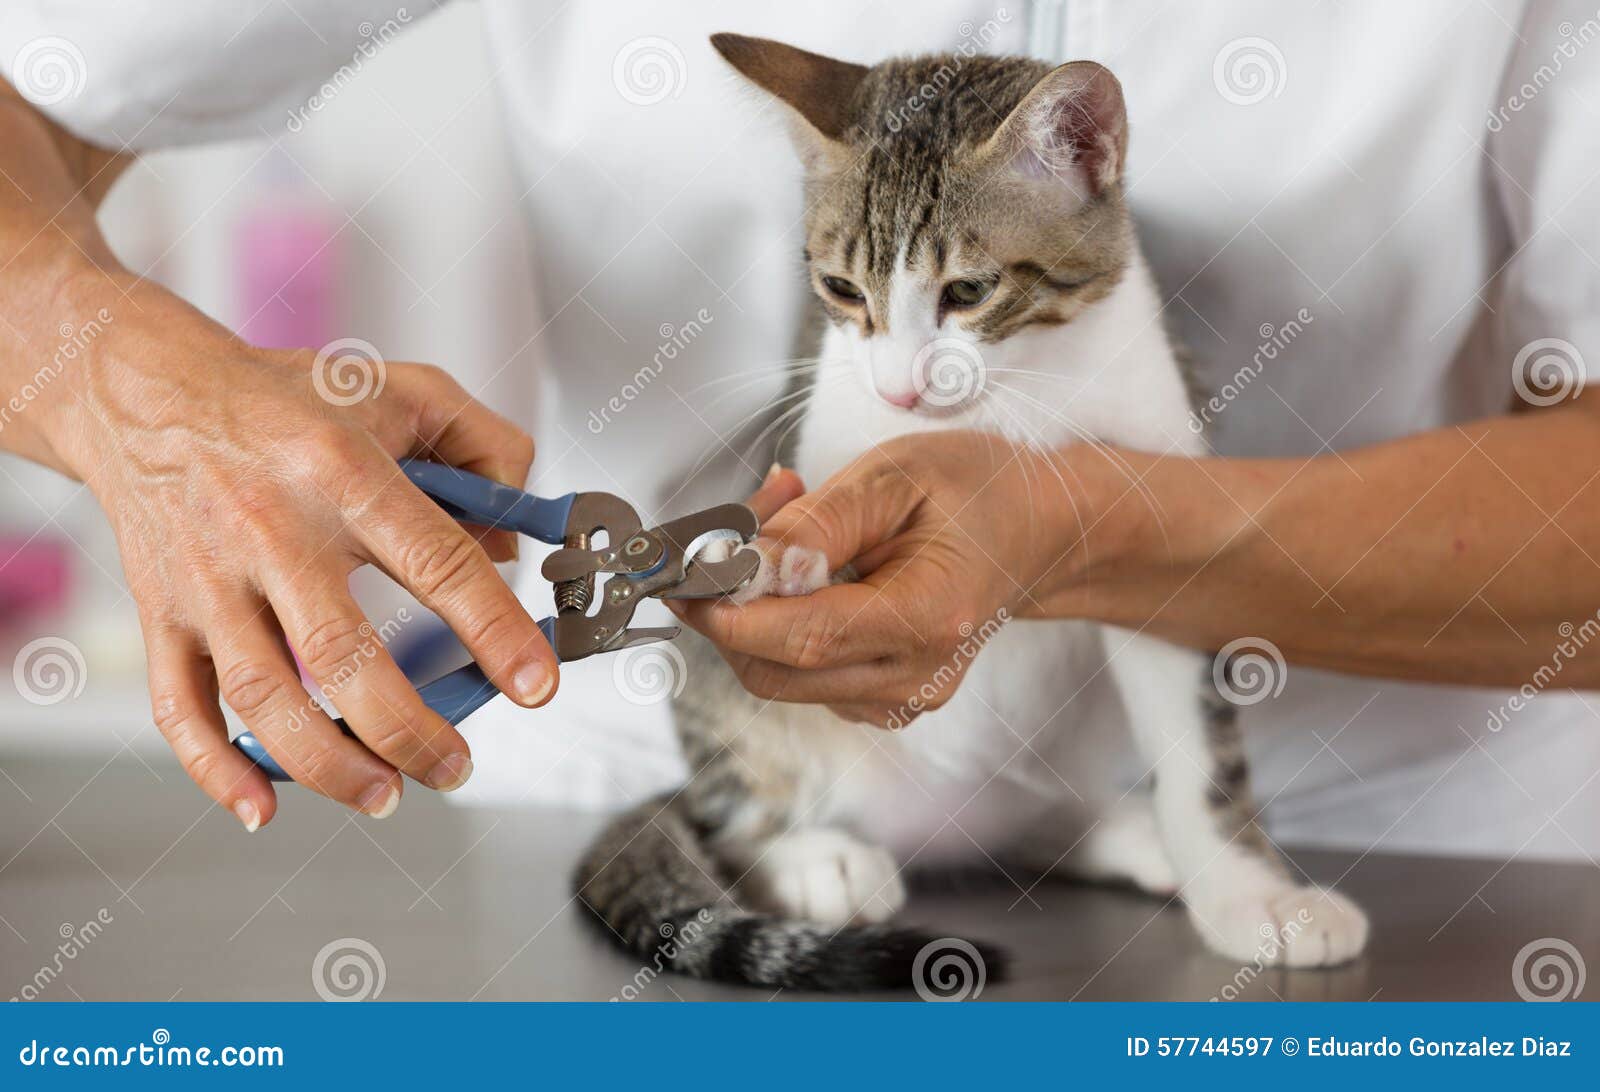 How to Trim Your Cat's Claws – Easy Method | HubPages